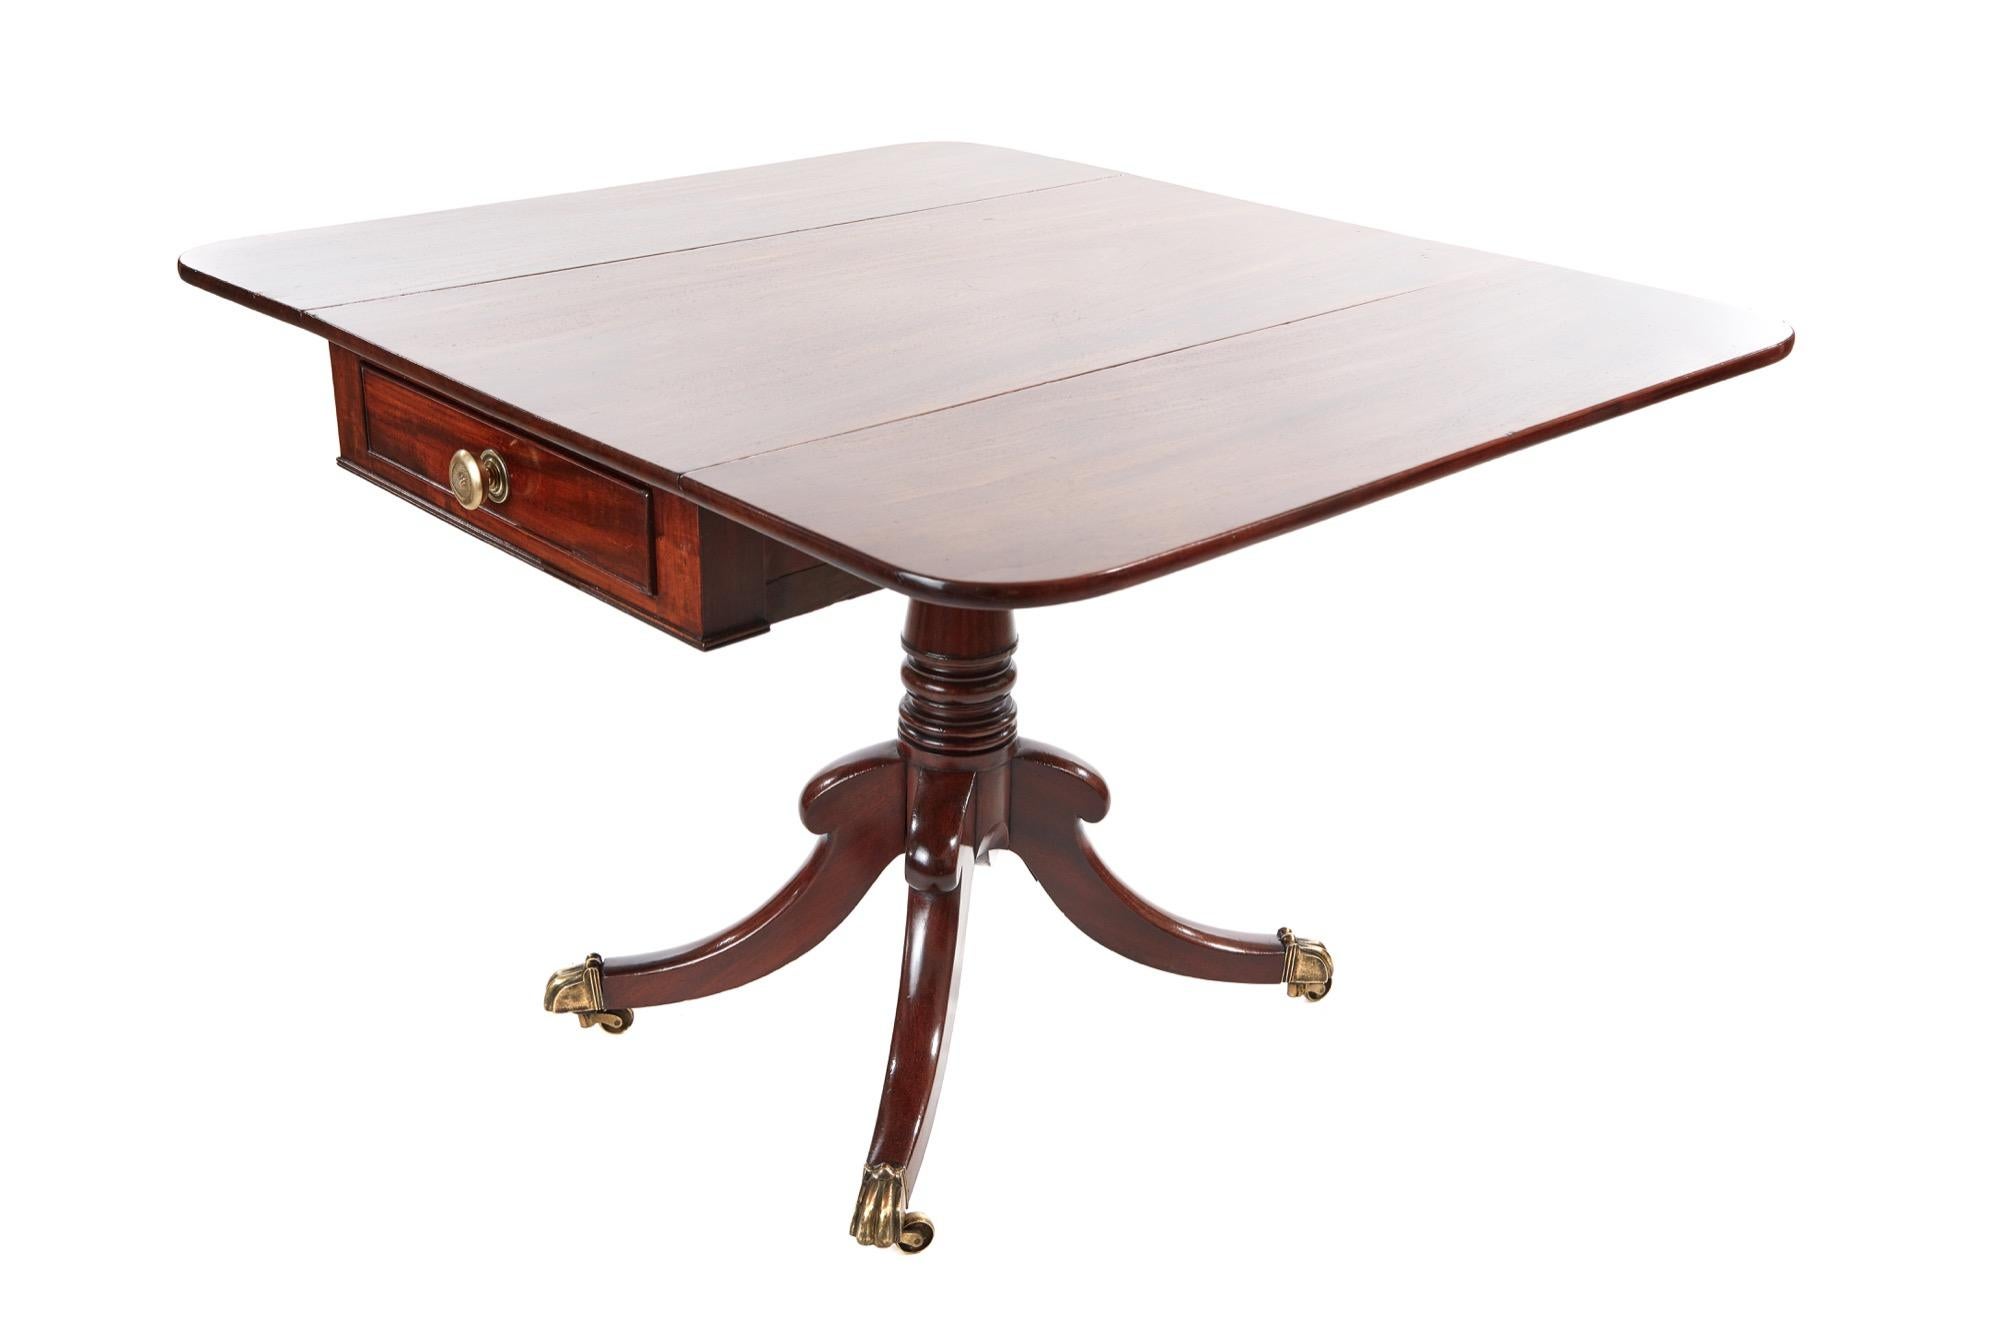 Regency antique mahogany Pembroke table with a fantastic mahogany top, two drop flaps, drawer and dummy drawer to the frieze with original brass handles. It has a lovely centre column raised on four sabred legs all terminating in original brass feet